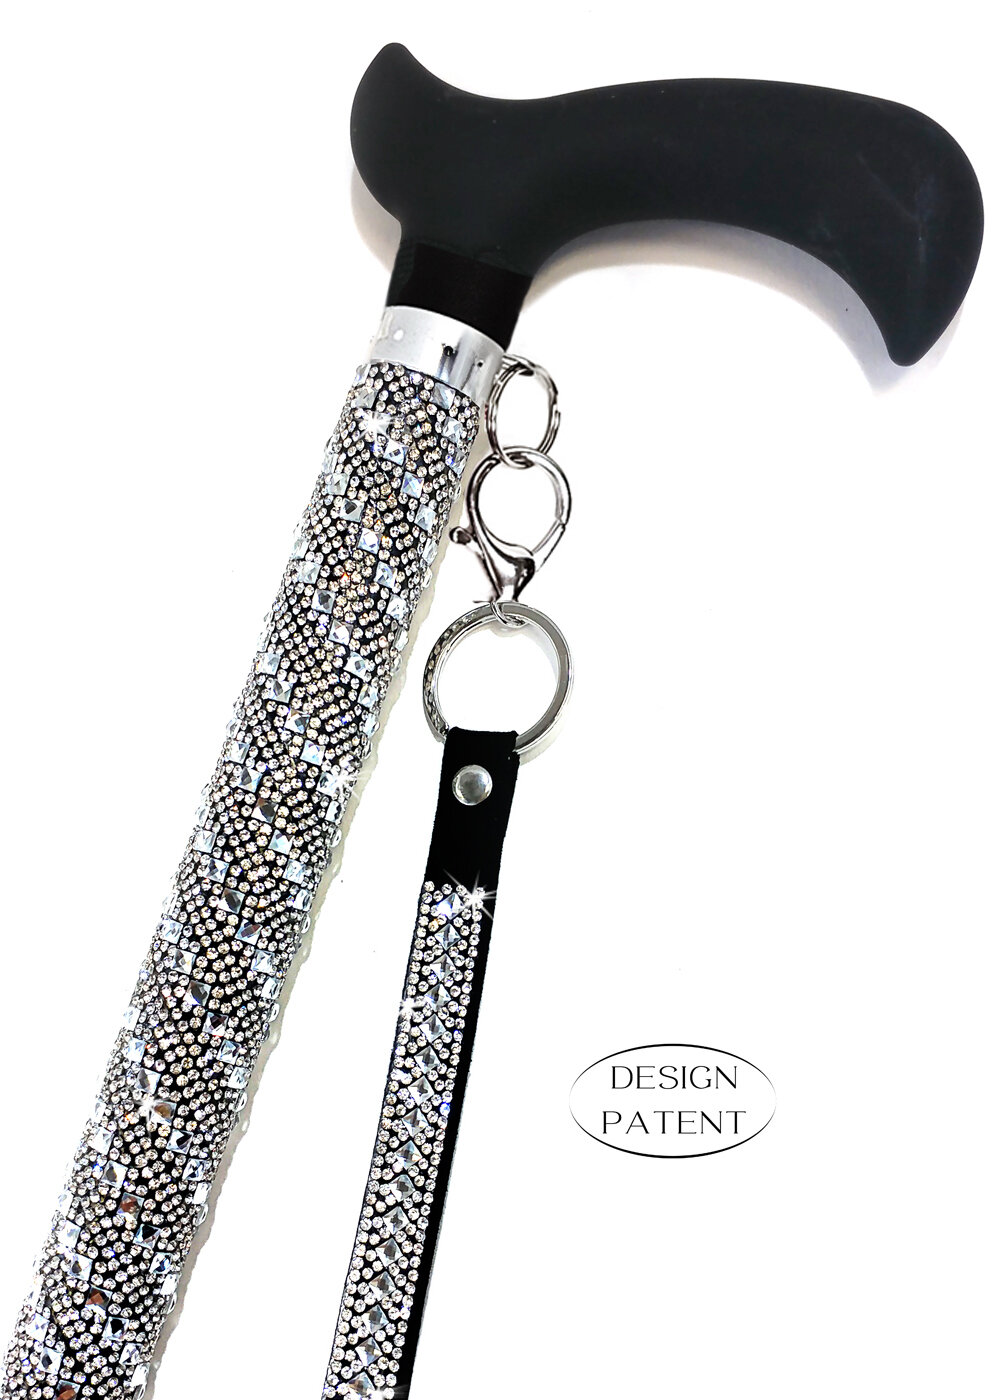 Jacqueline Kent JKC103.SI grey Silver Aluminum Crystal Embellished Sugar Cane with Black Handle and Coordinating Wrist Band Adjustable 28.5 Inches to 37.5 Inches 